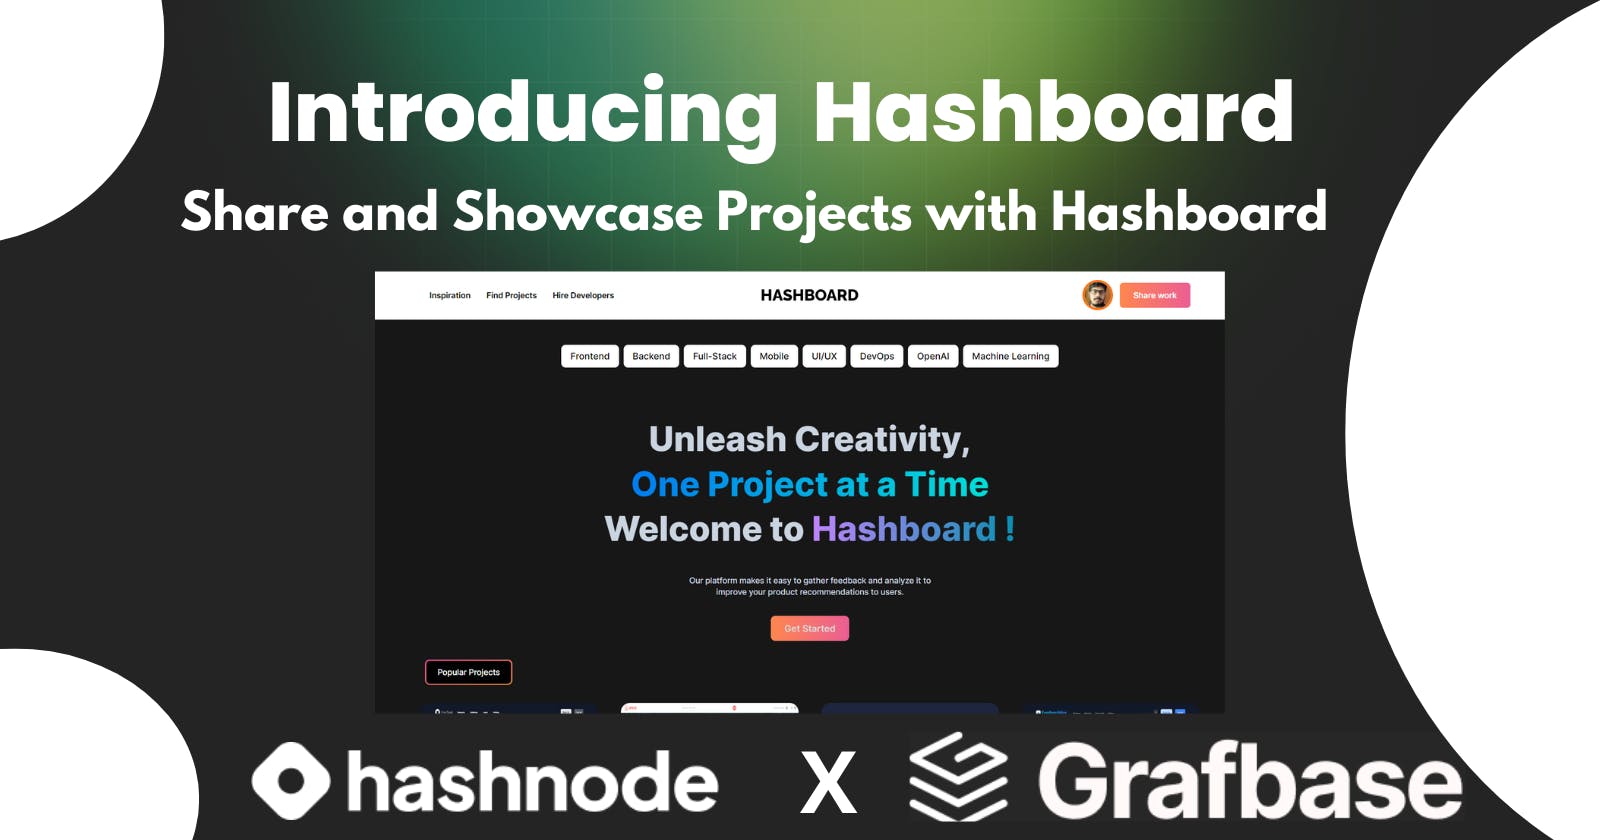 Introducing Hashboard: Your Creative Hub for Sharing and Discovering Inspiring Projects